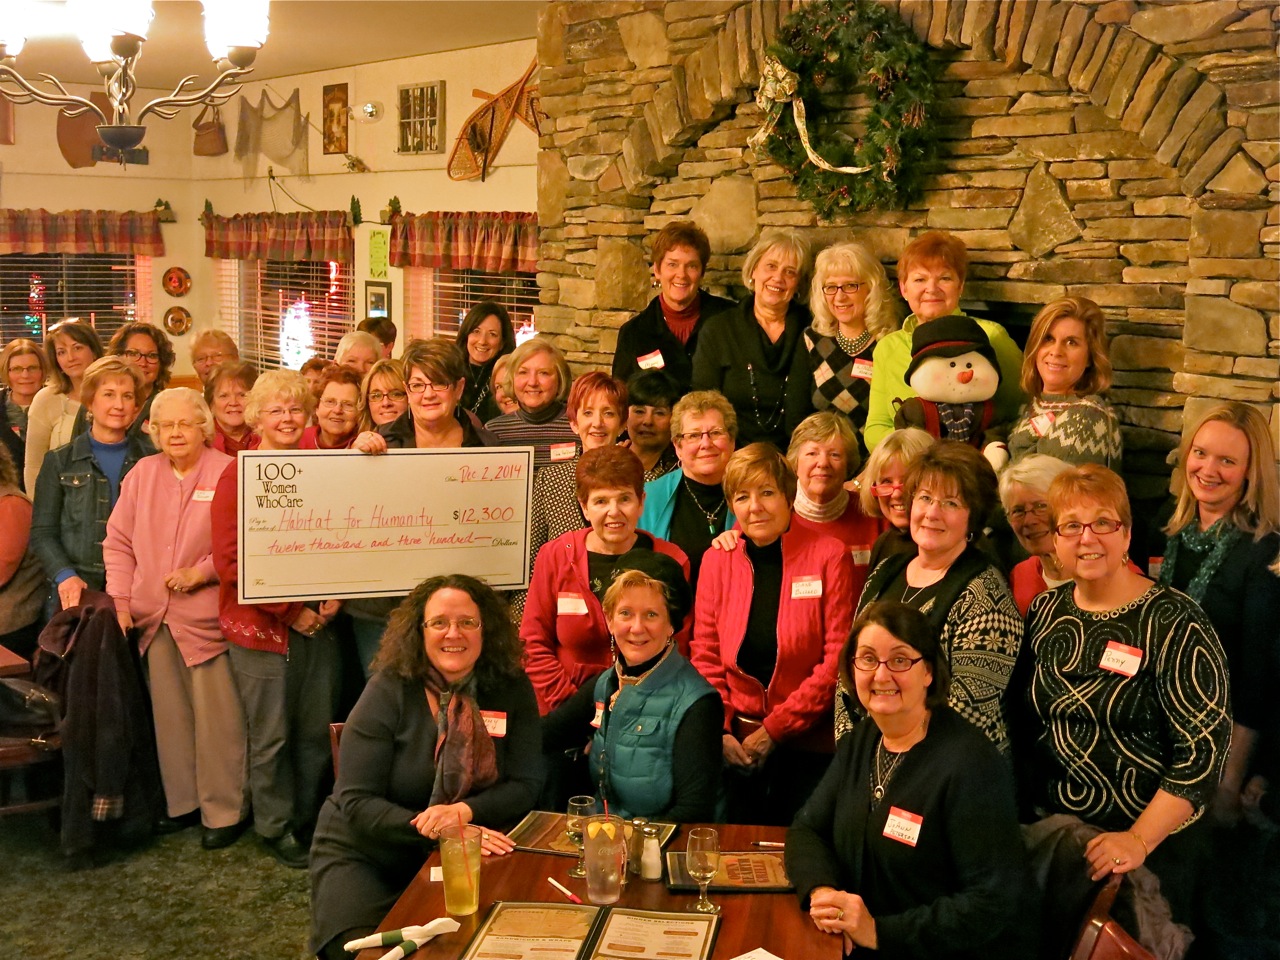 Women Who Care donate $12,300 to Habitat for Humanity